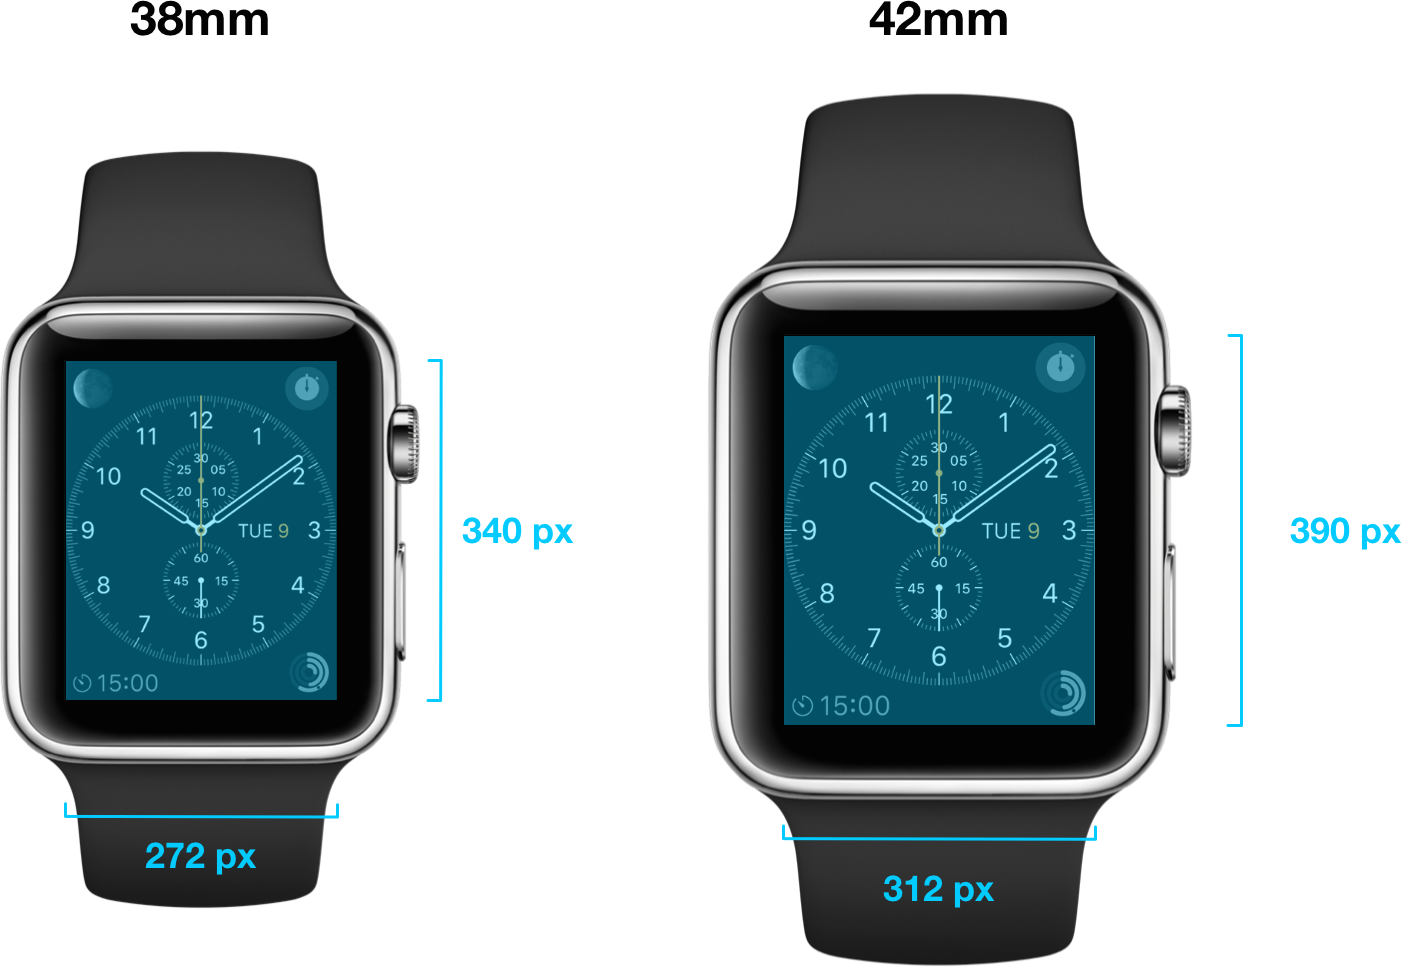 07-short-look-apple-watch-human-interface-design-guideline-ui-ux-experience-app.png